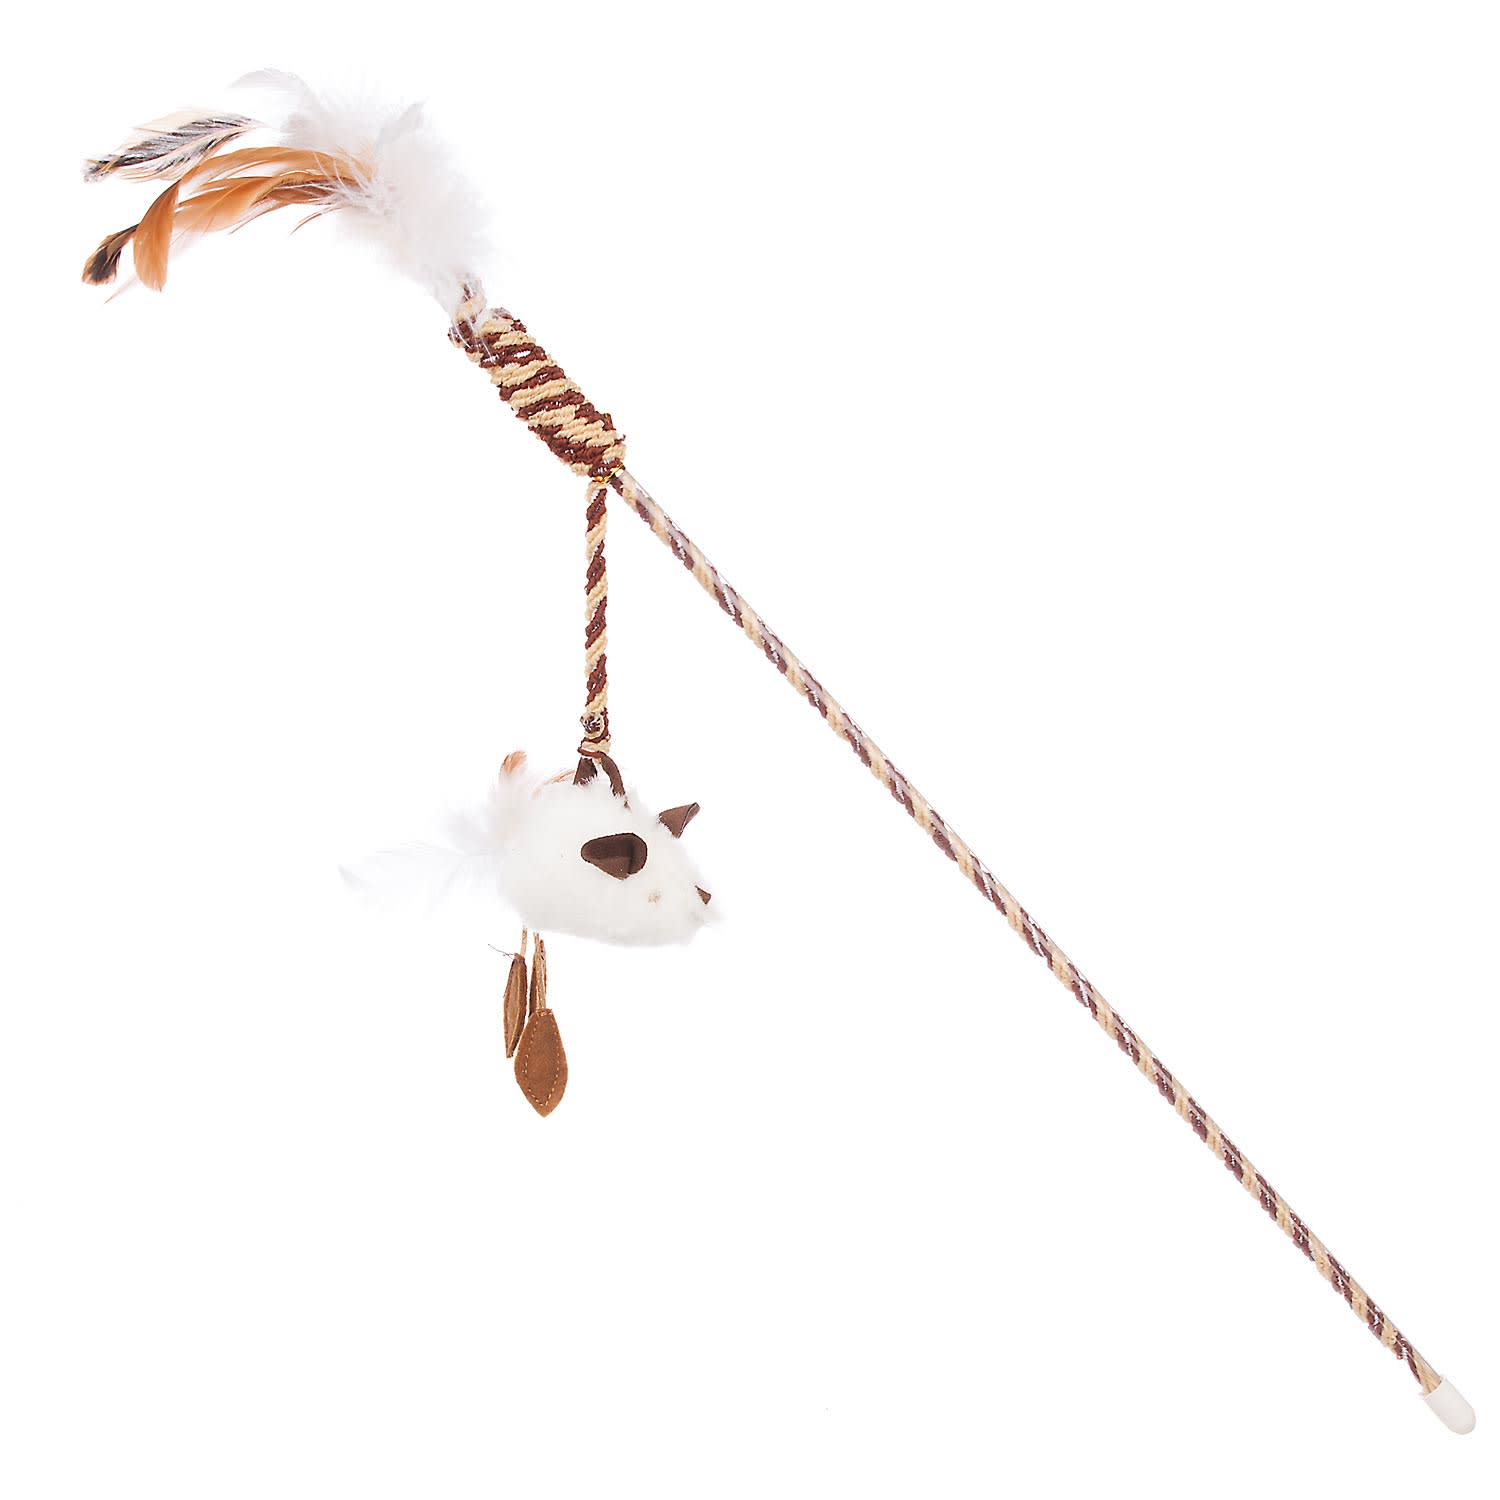 OurPets Assorted Feather Teaser Play Wand Cat Toy 